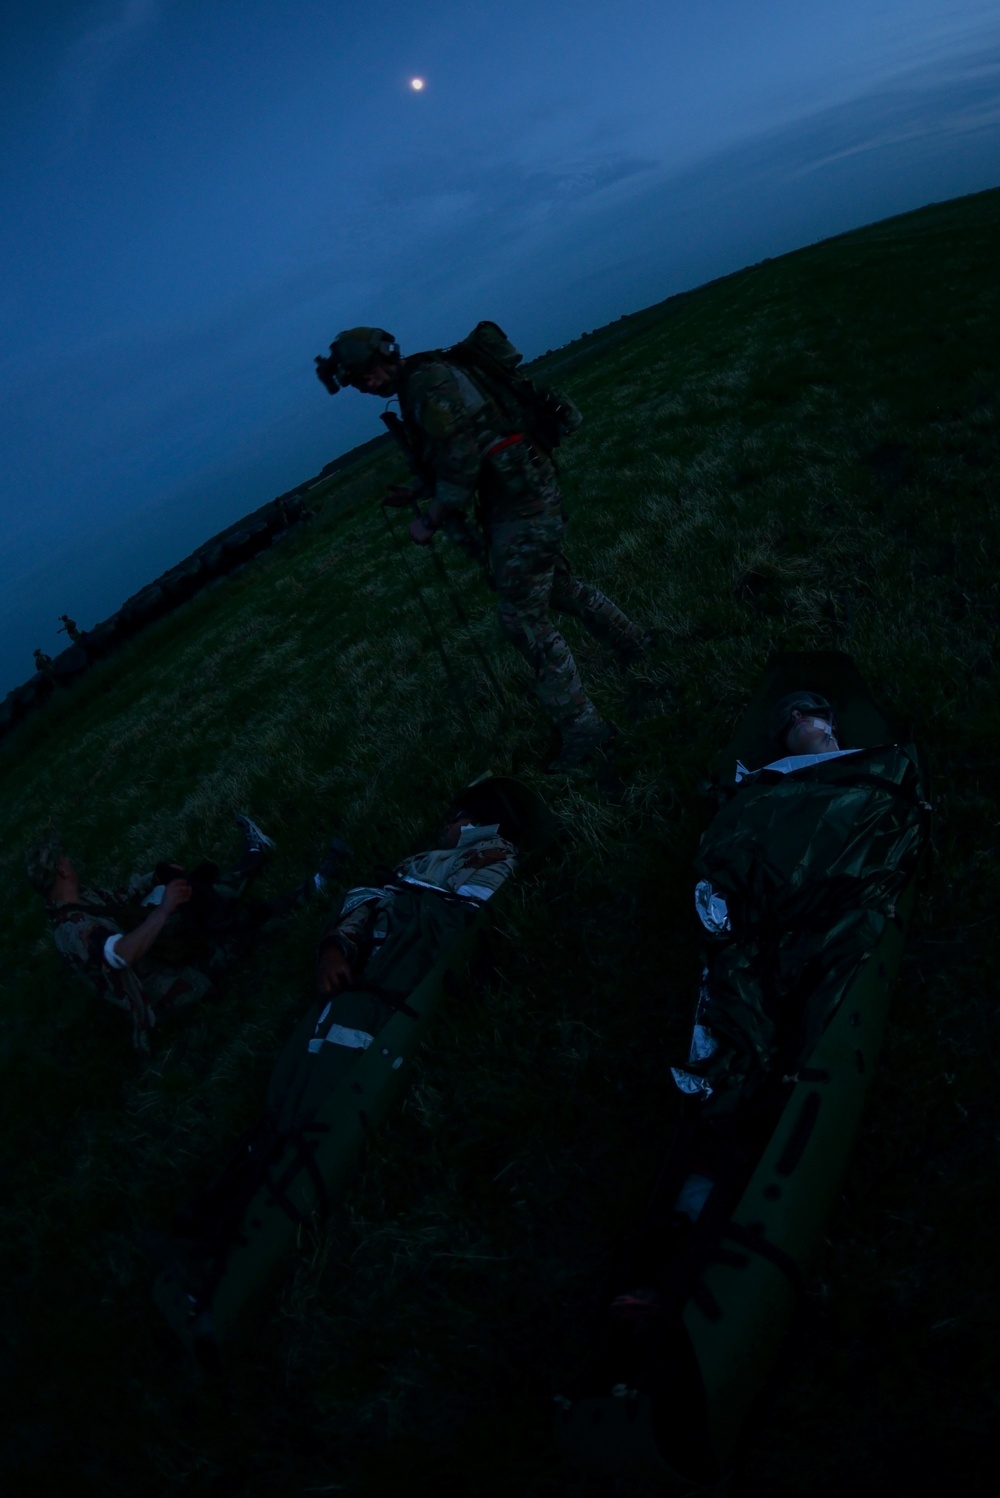 321st Air Commandos exercise exfiltration at Sculthorpe